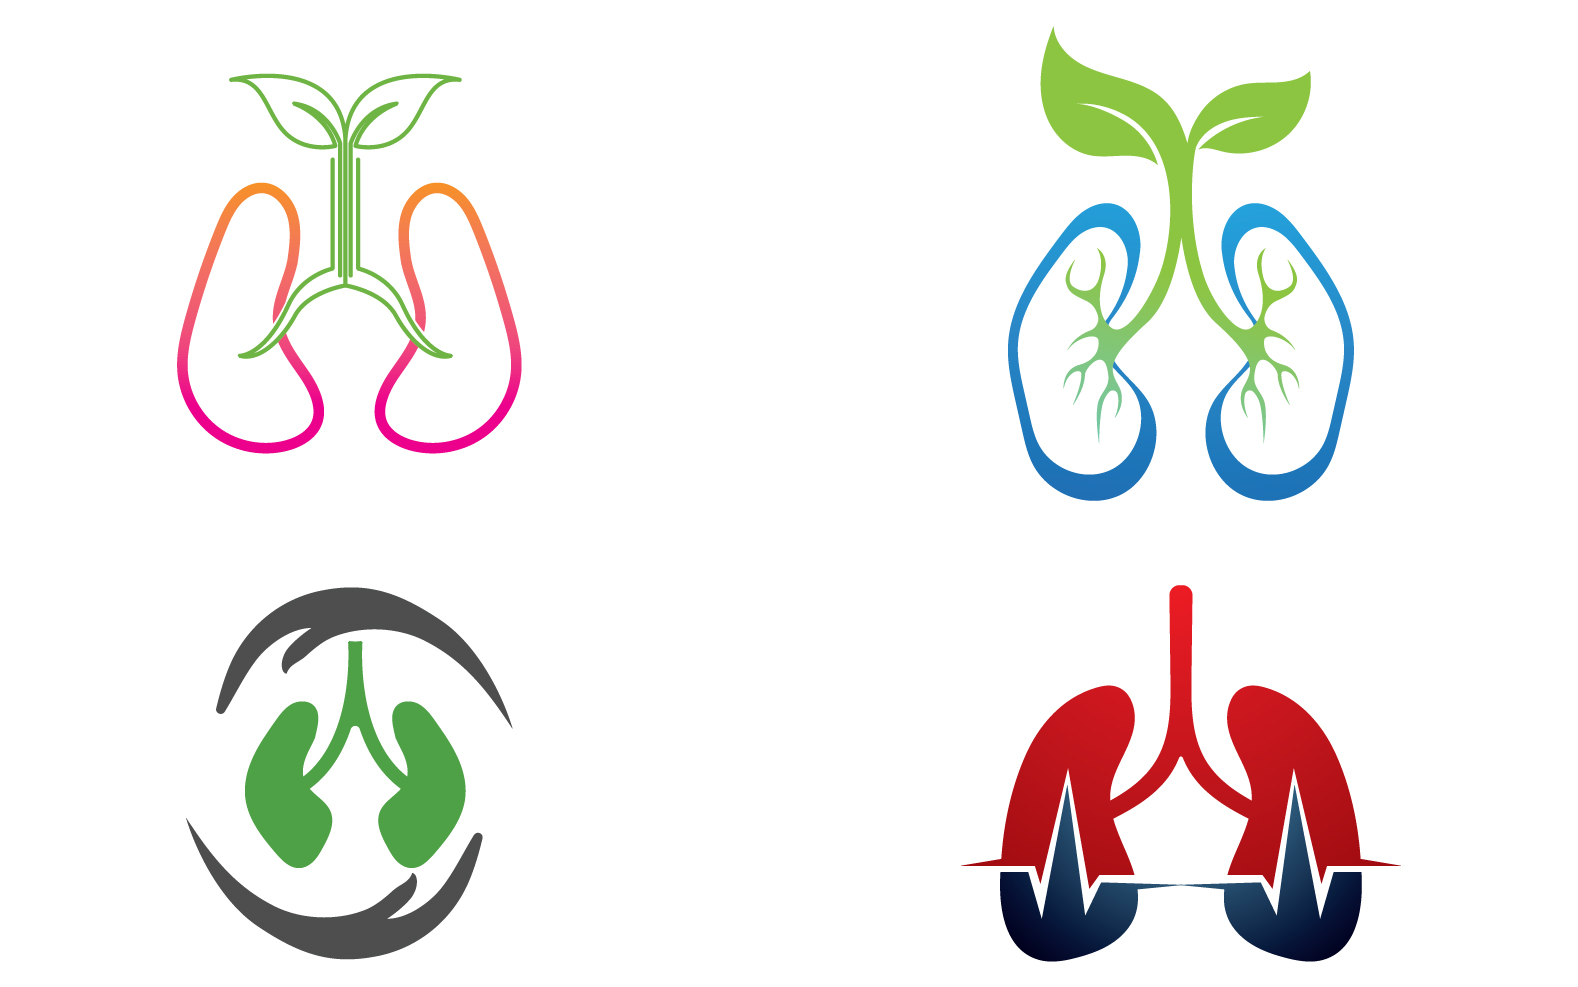 Health lungs logo and symbol vector v22 - TemplateMonster